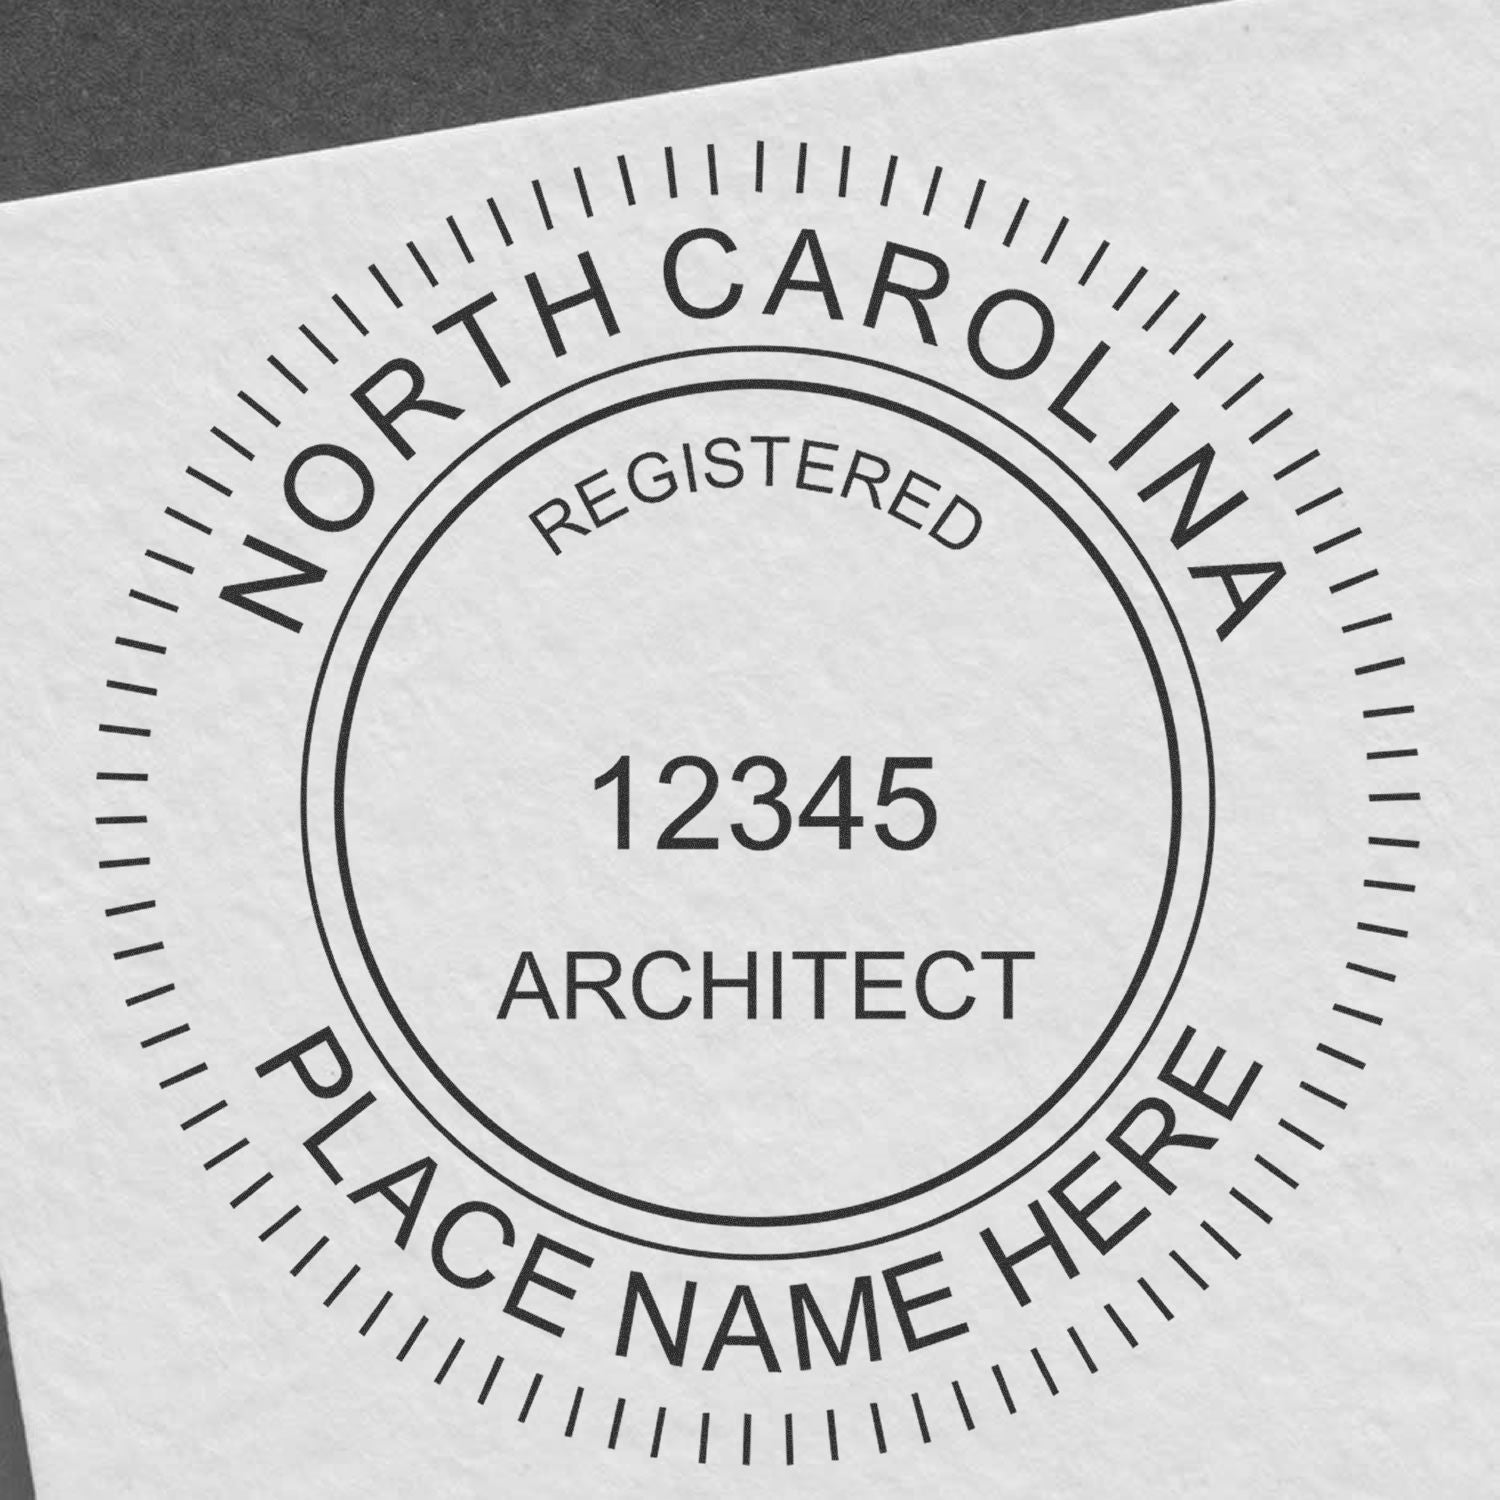 Slim Pre-Inked North Carolina Architect Seal Stamp in use photo showing a stamped imprint of the Slim Pre-Inked North Carolina Architect Seal Stamp